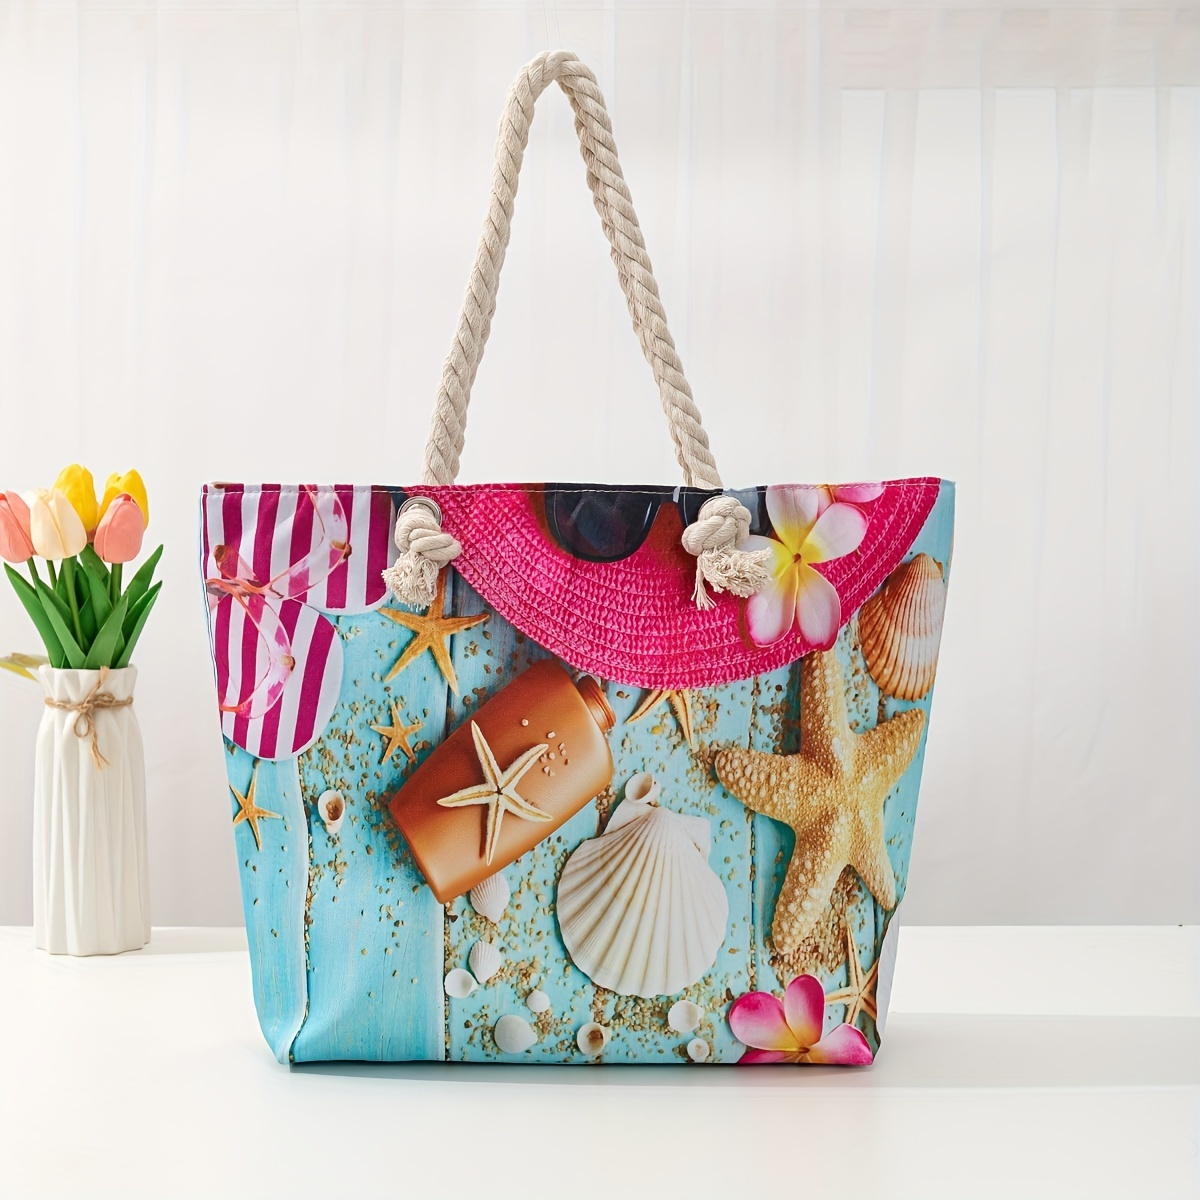 

Beach-themed Oversized Canvas Tote Bag, Seaside Resort Style, Durable Double-handle Shoulder Bag For Summer Holidays, Fashionable And Roomy Beach Accessory